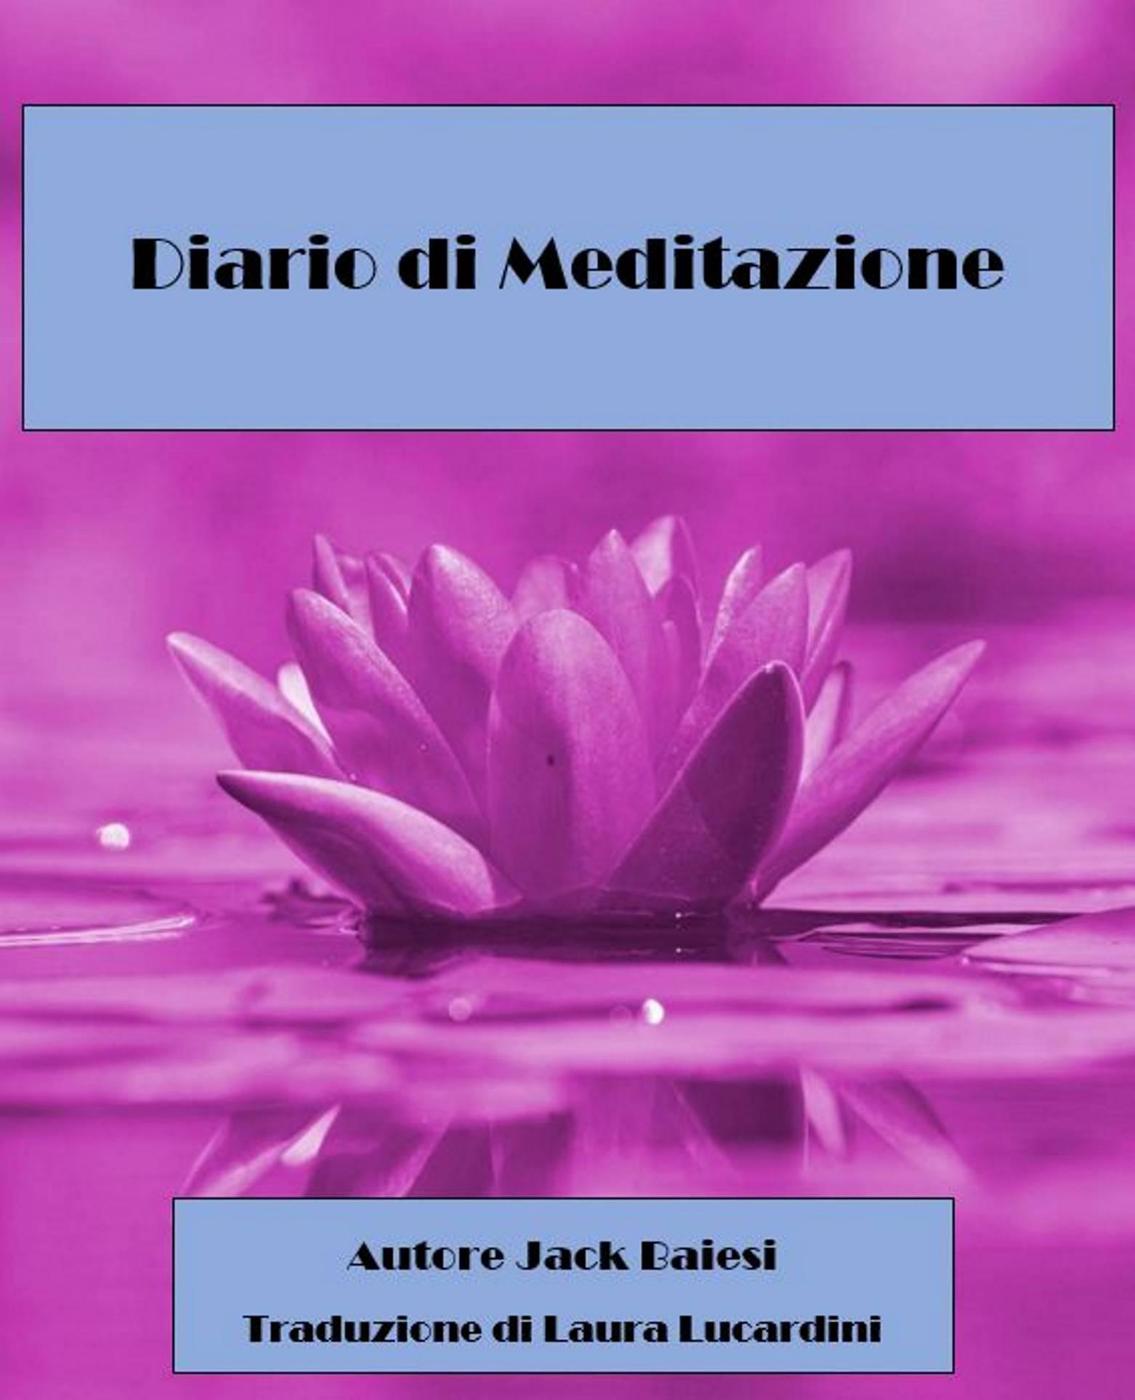 This image is the cover for the book Diario di meditazione